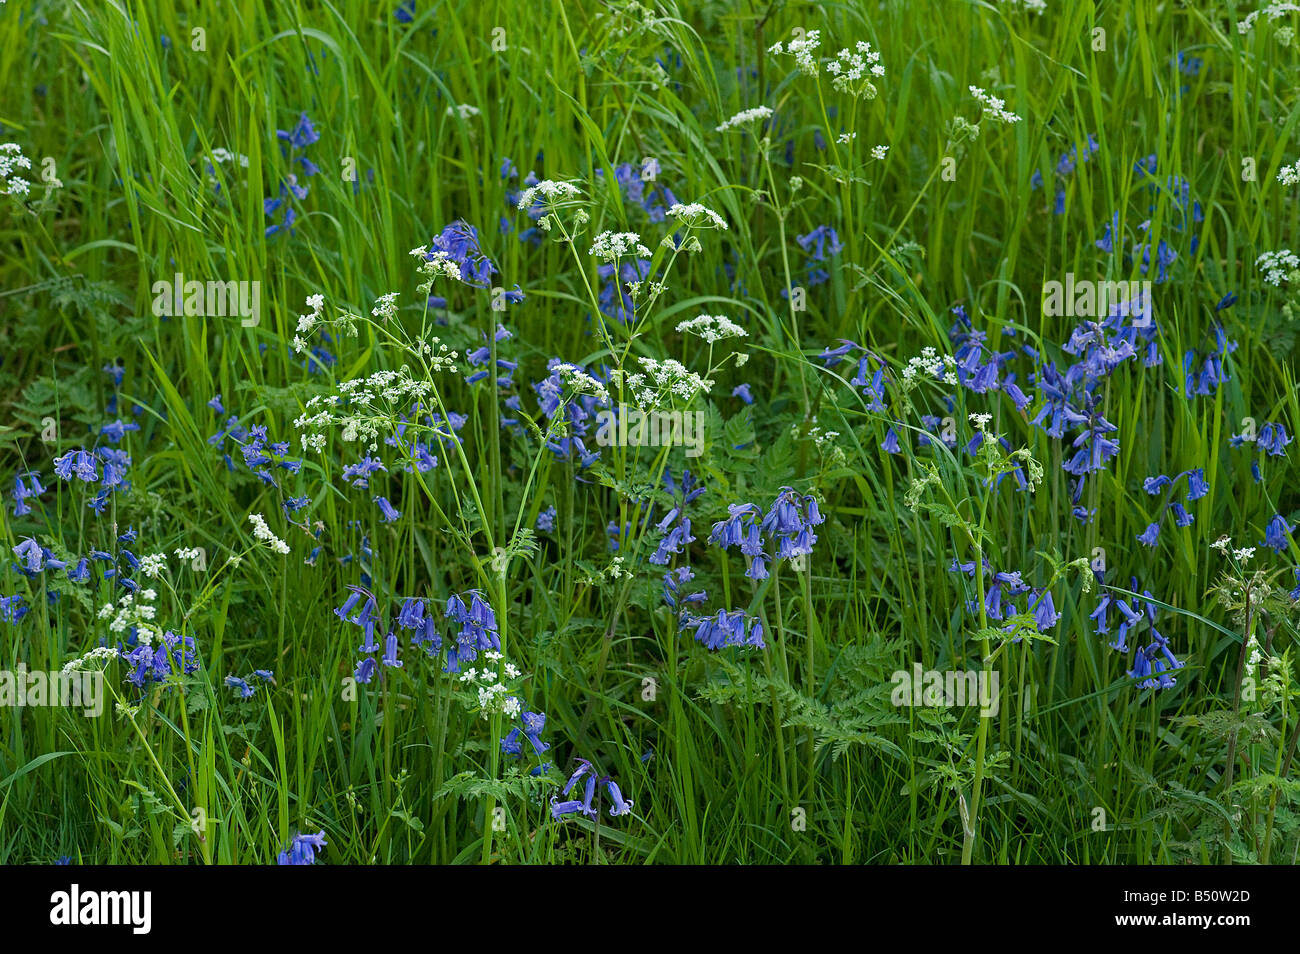 Bluebells Hyacinthoides non scripta and cow parsley Anthriscus sylvestris in long grass Stock Photo